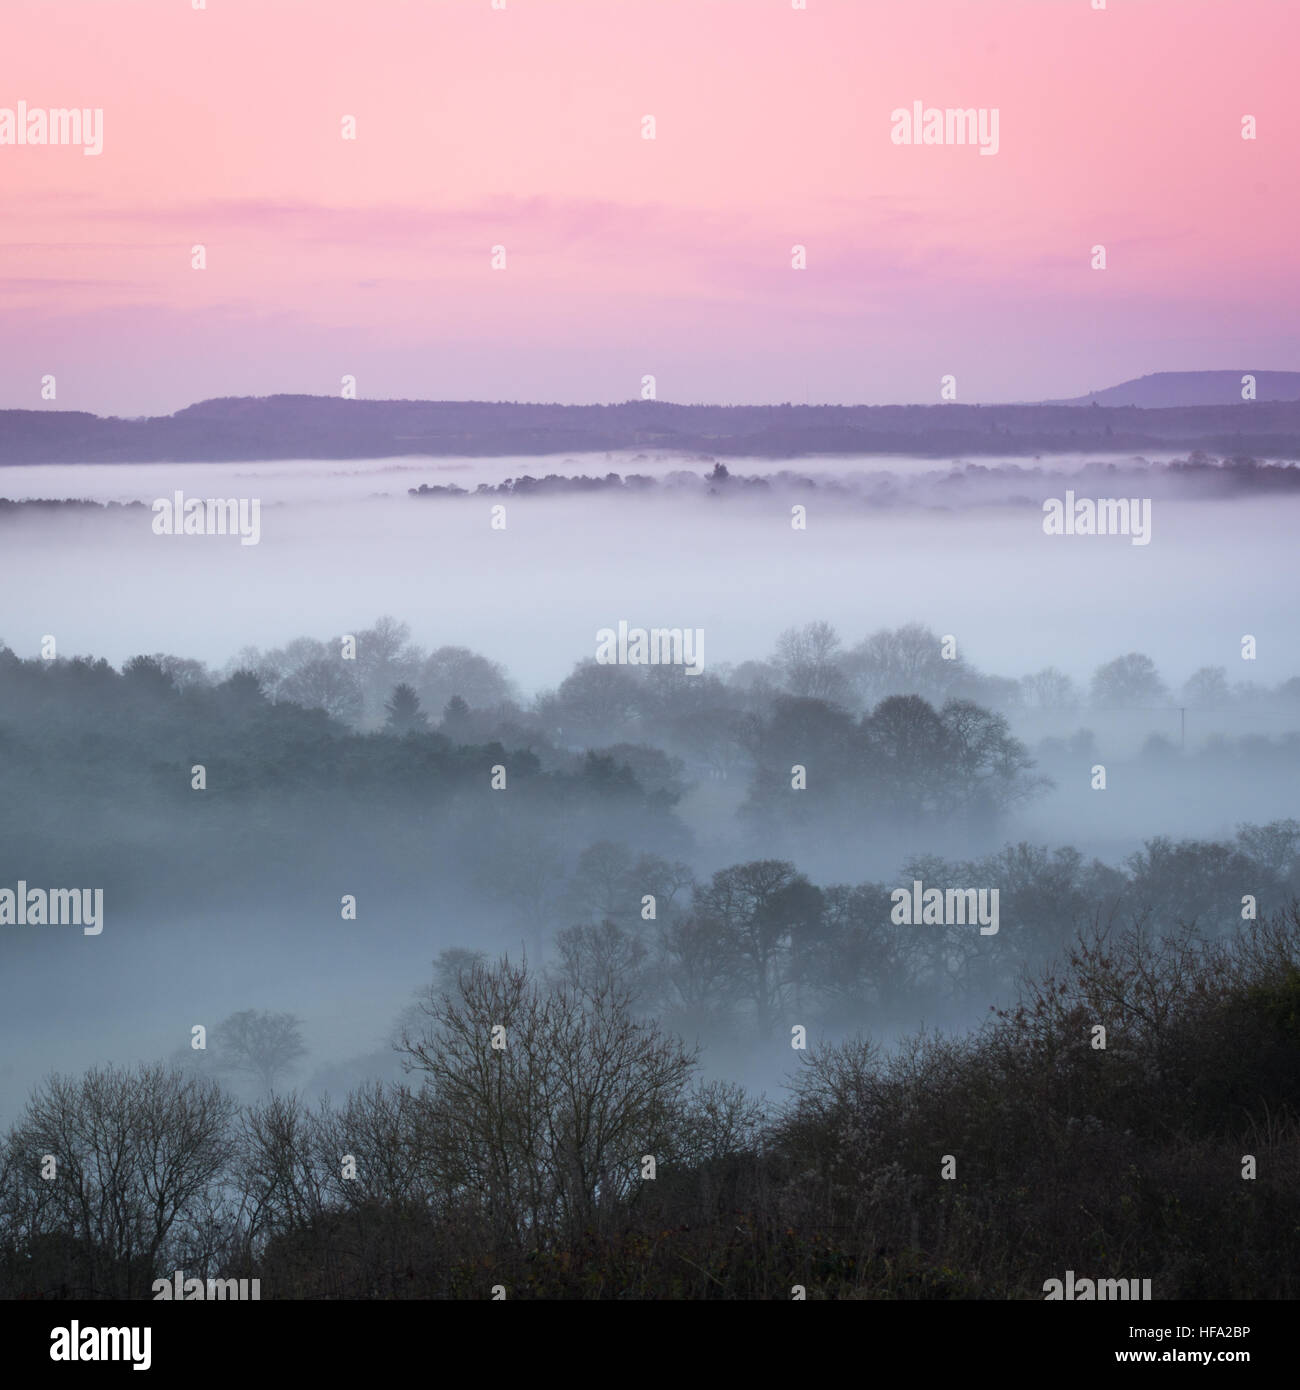 Newland's Corner in the Surrey Hills AONB, UK. An early morning misty countryside scene or landscape in winter or december Stock Photo